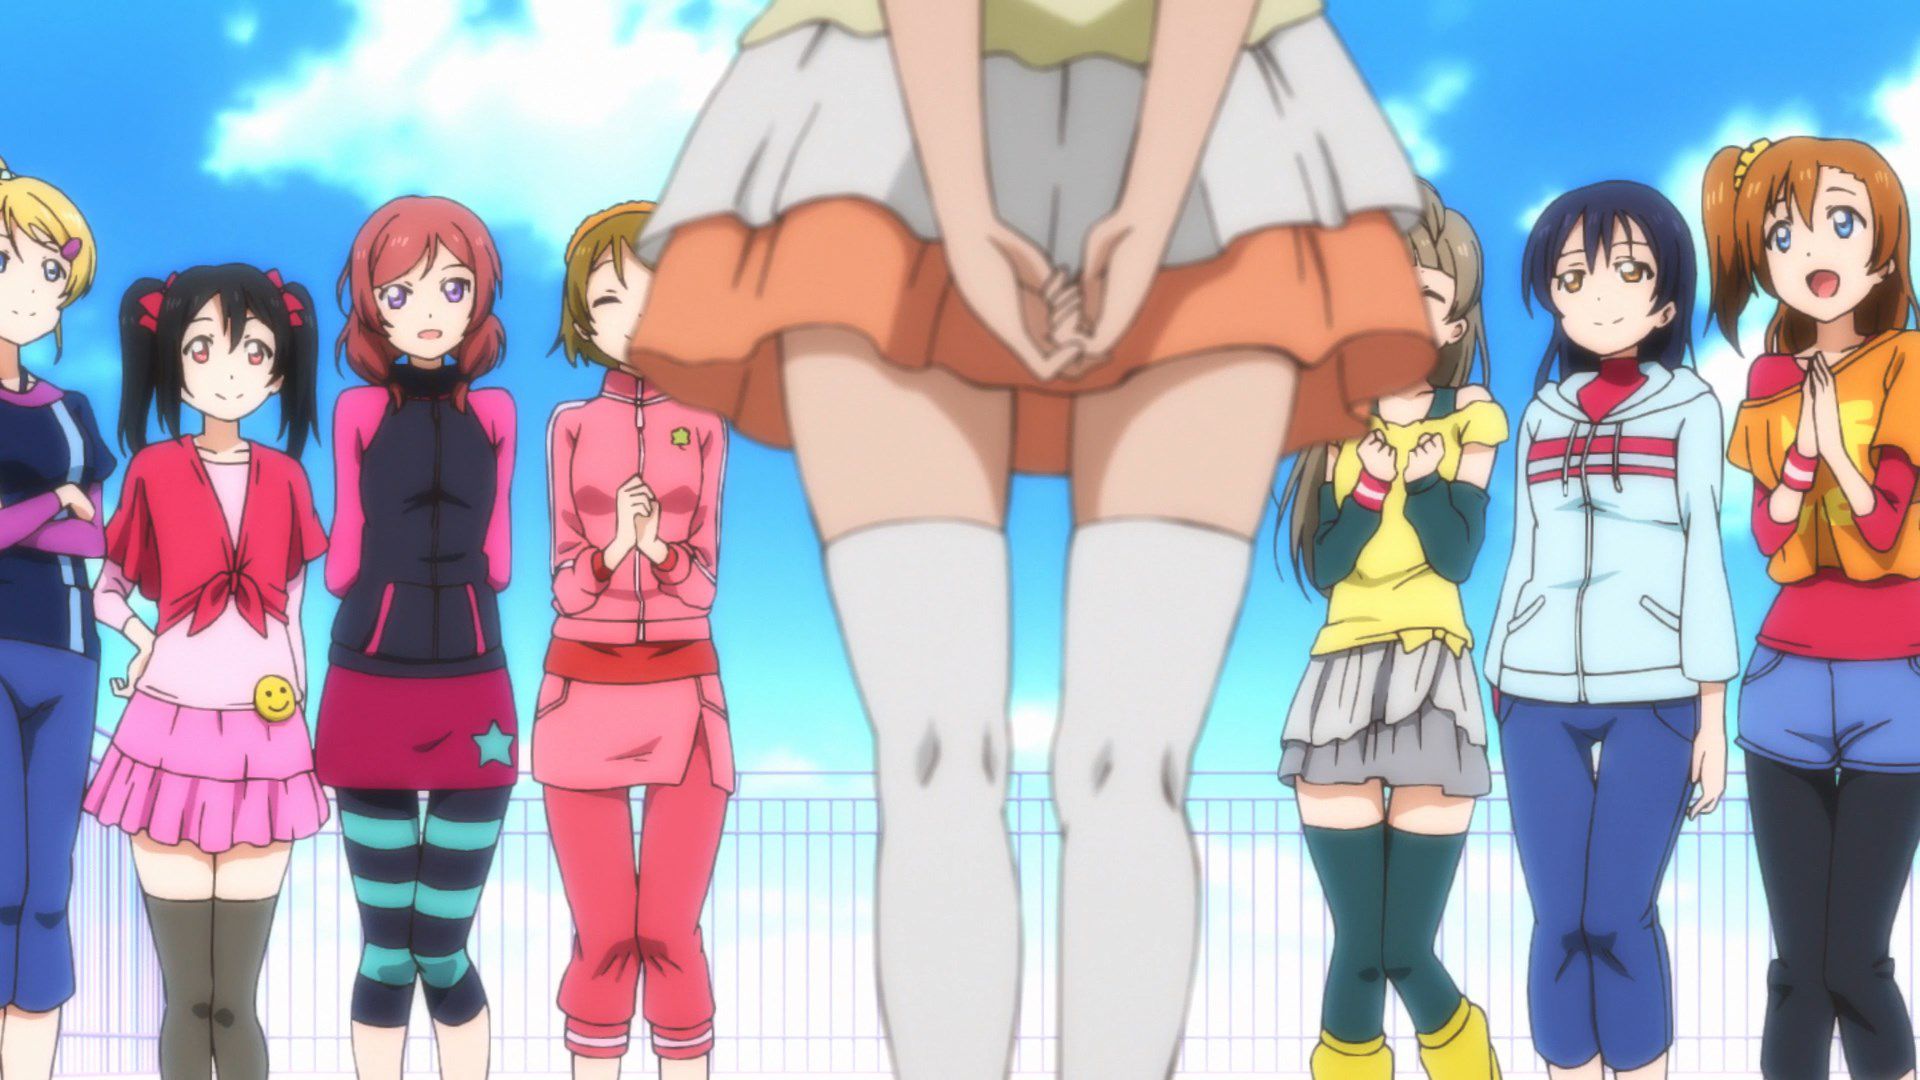 [God images] "love live! ' Μm ' PV's leg is too erotic everyone wakes up to a leg fetish of wwwww 65